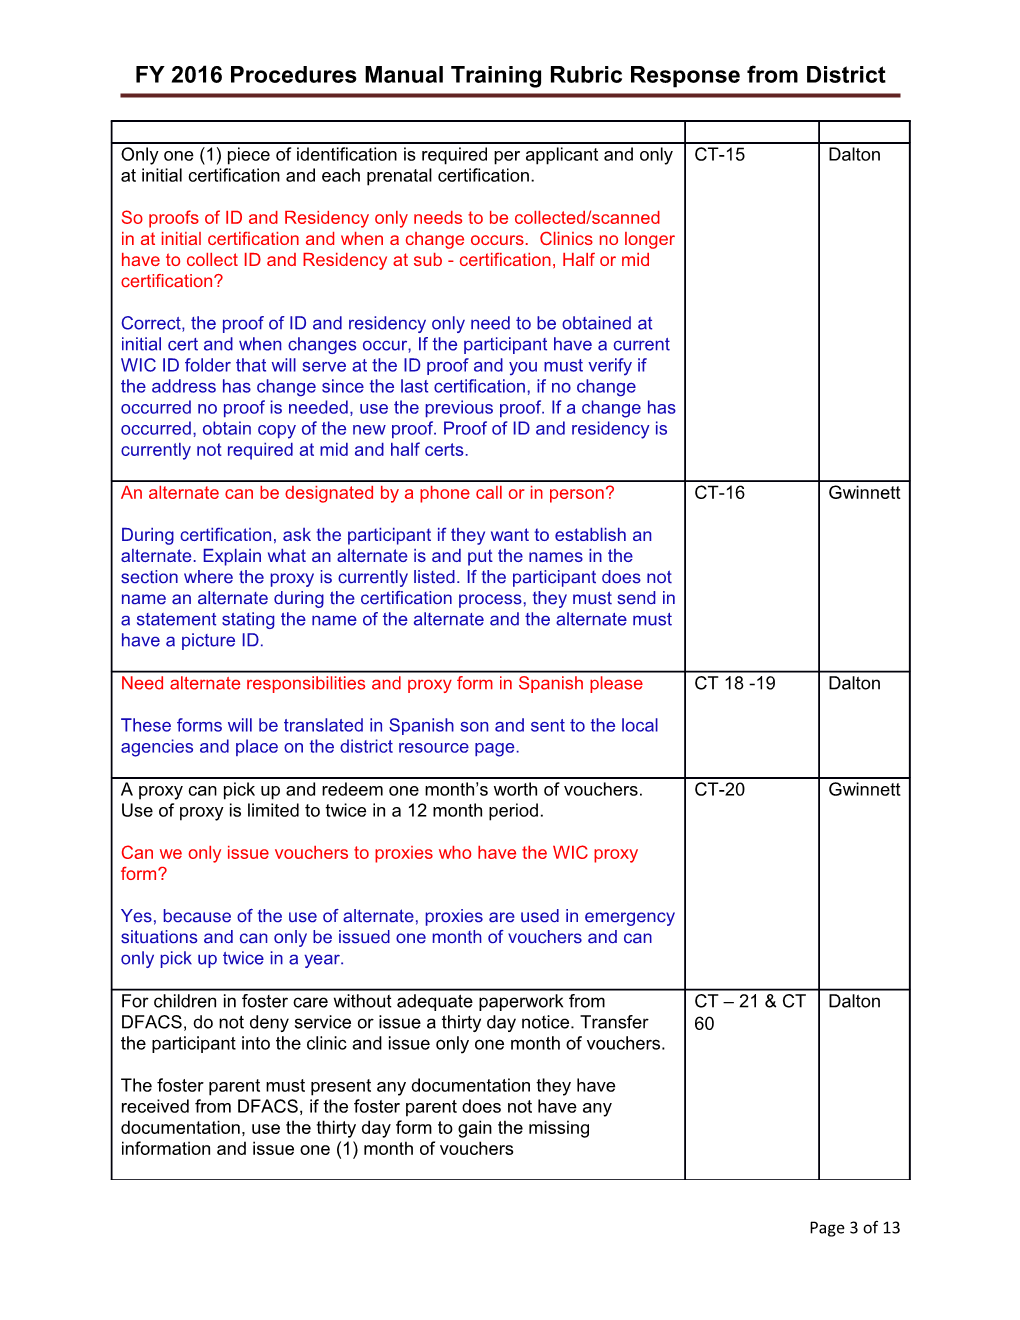 FY 2016 Procedures Manual Training Rubric Response from District